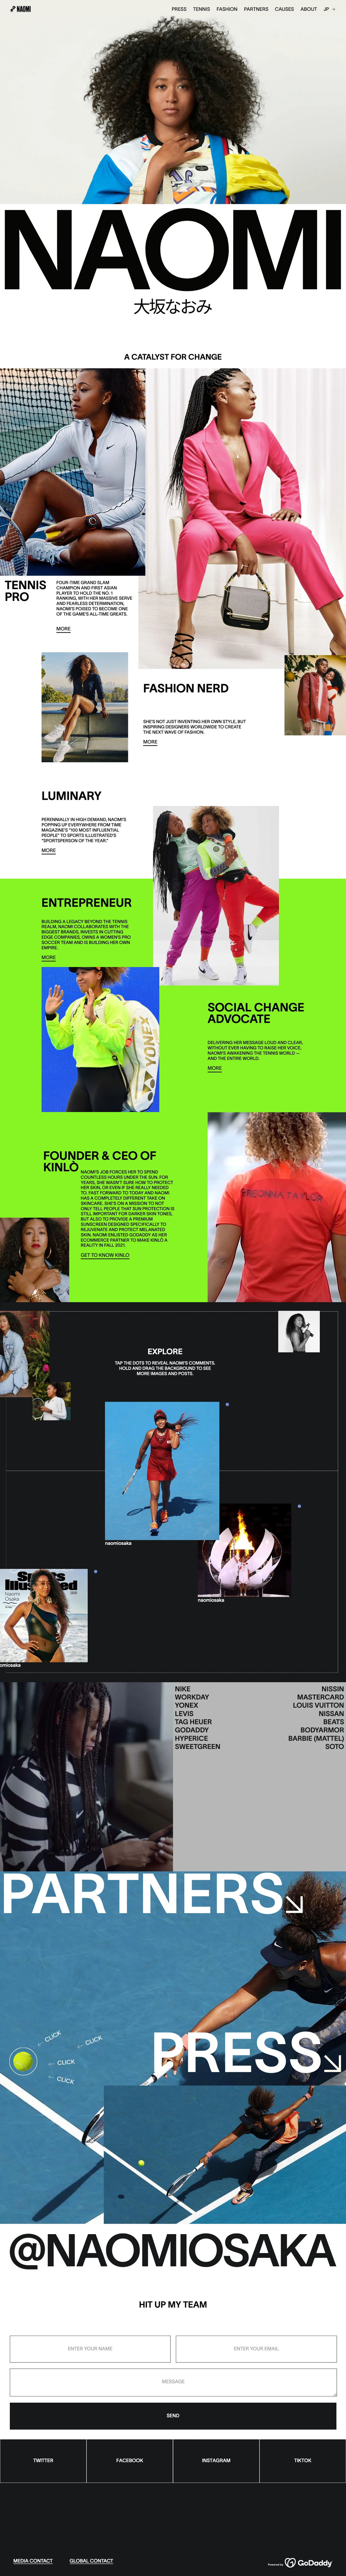 Naomi Osaka Landing Page Example: Four-time Grand Slam champion and first Asian player to hold the No. 1 ranking, with her massive serve and fearless determination, Naomi’s poised to become one of the game’s all-time greats.